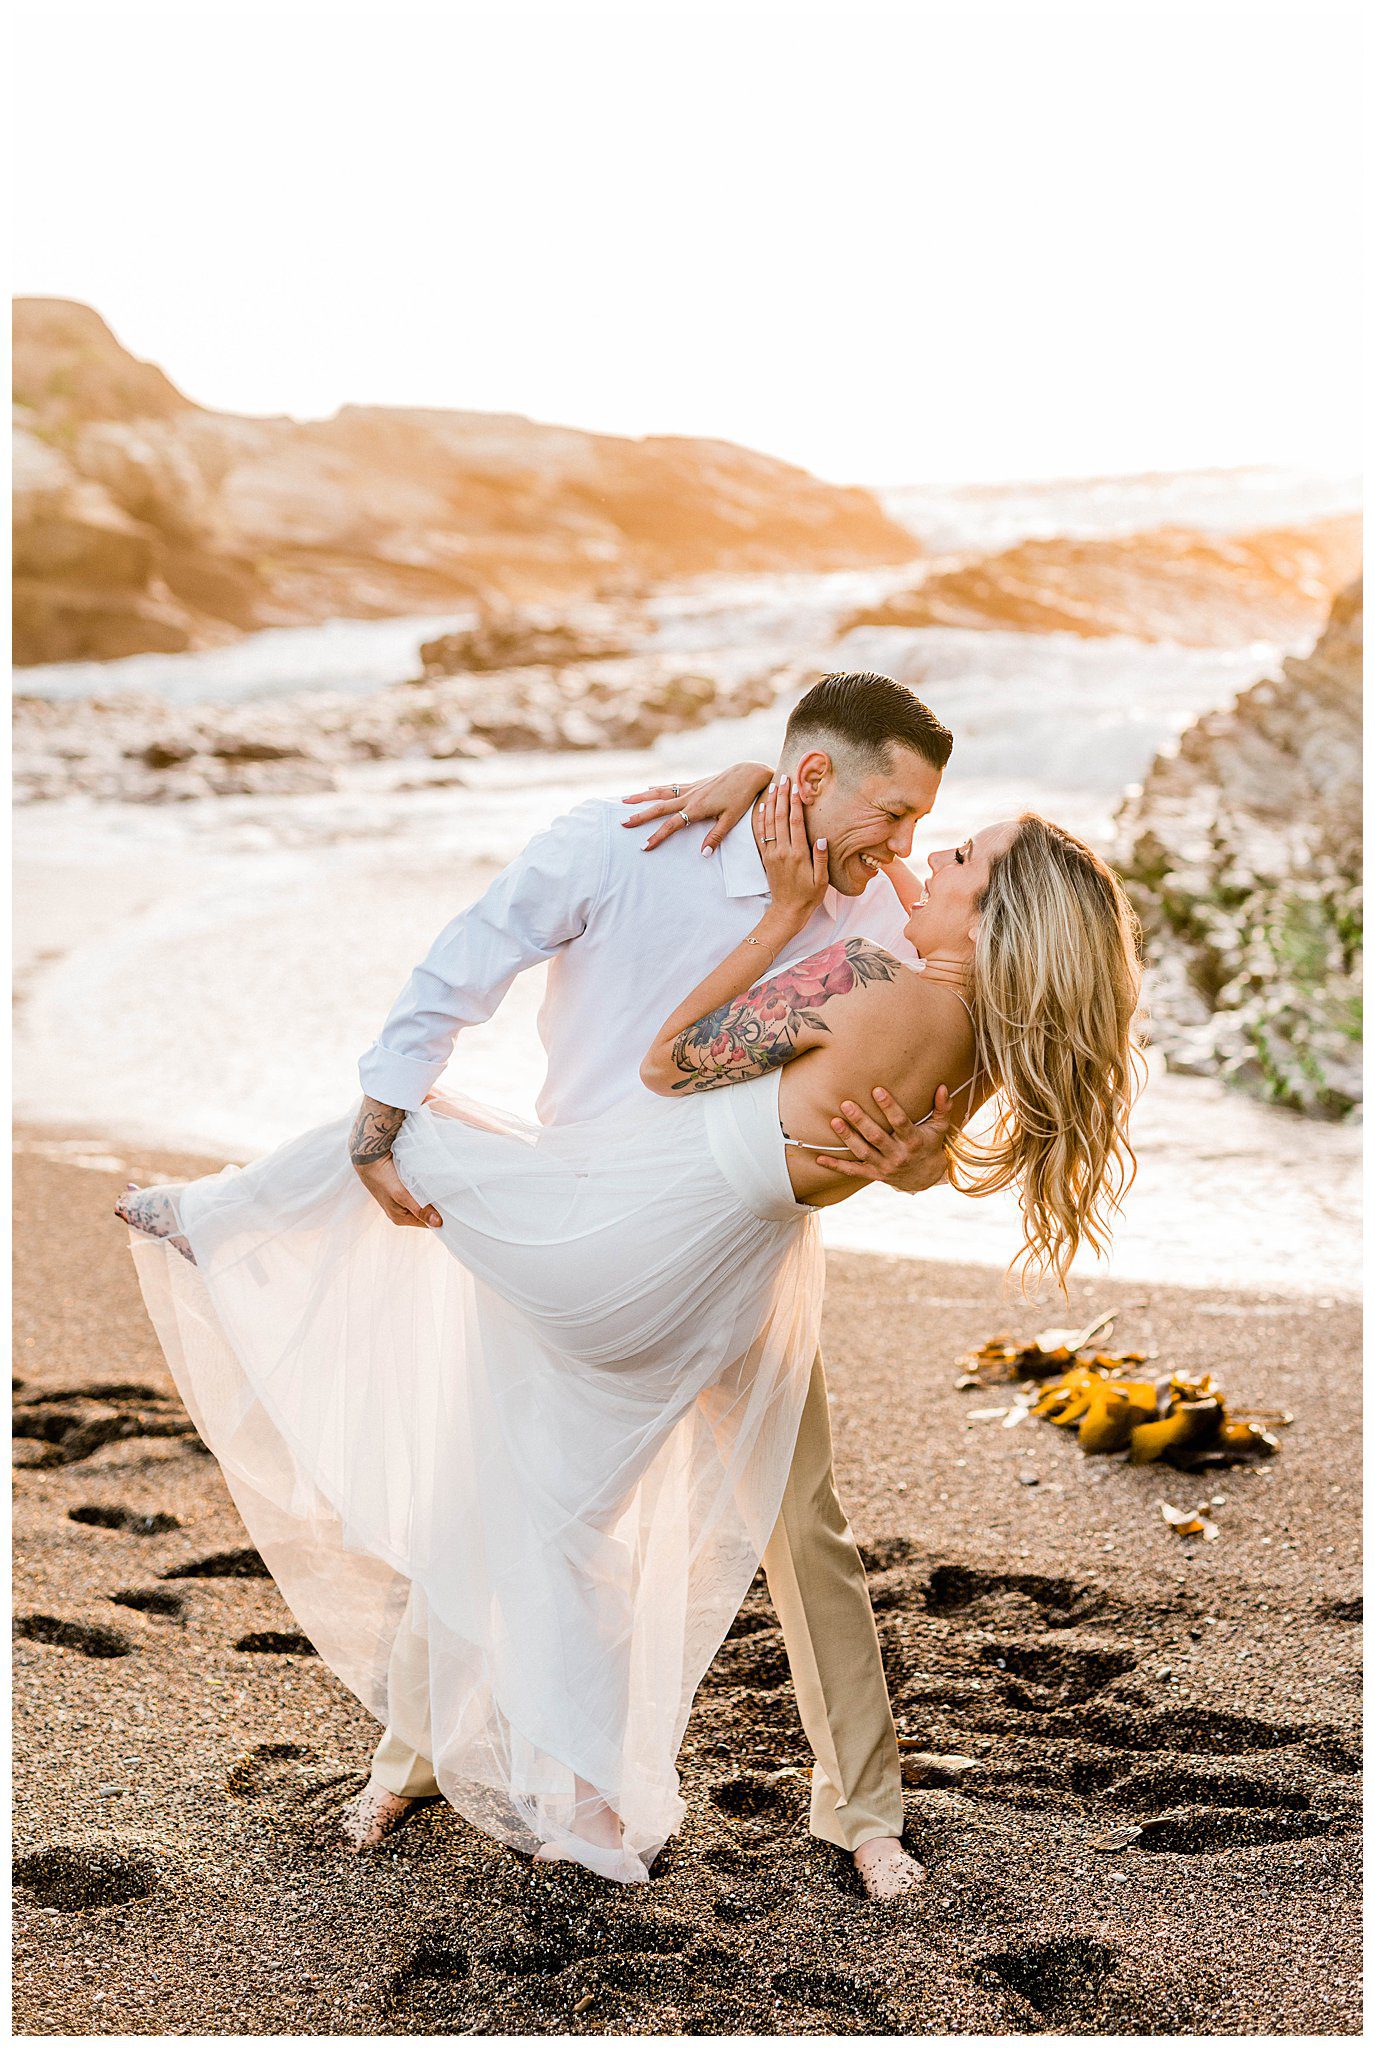 A bride and groom laugh during a candid moment on the beach while taking engagement session photos in Montana de Oro.